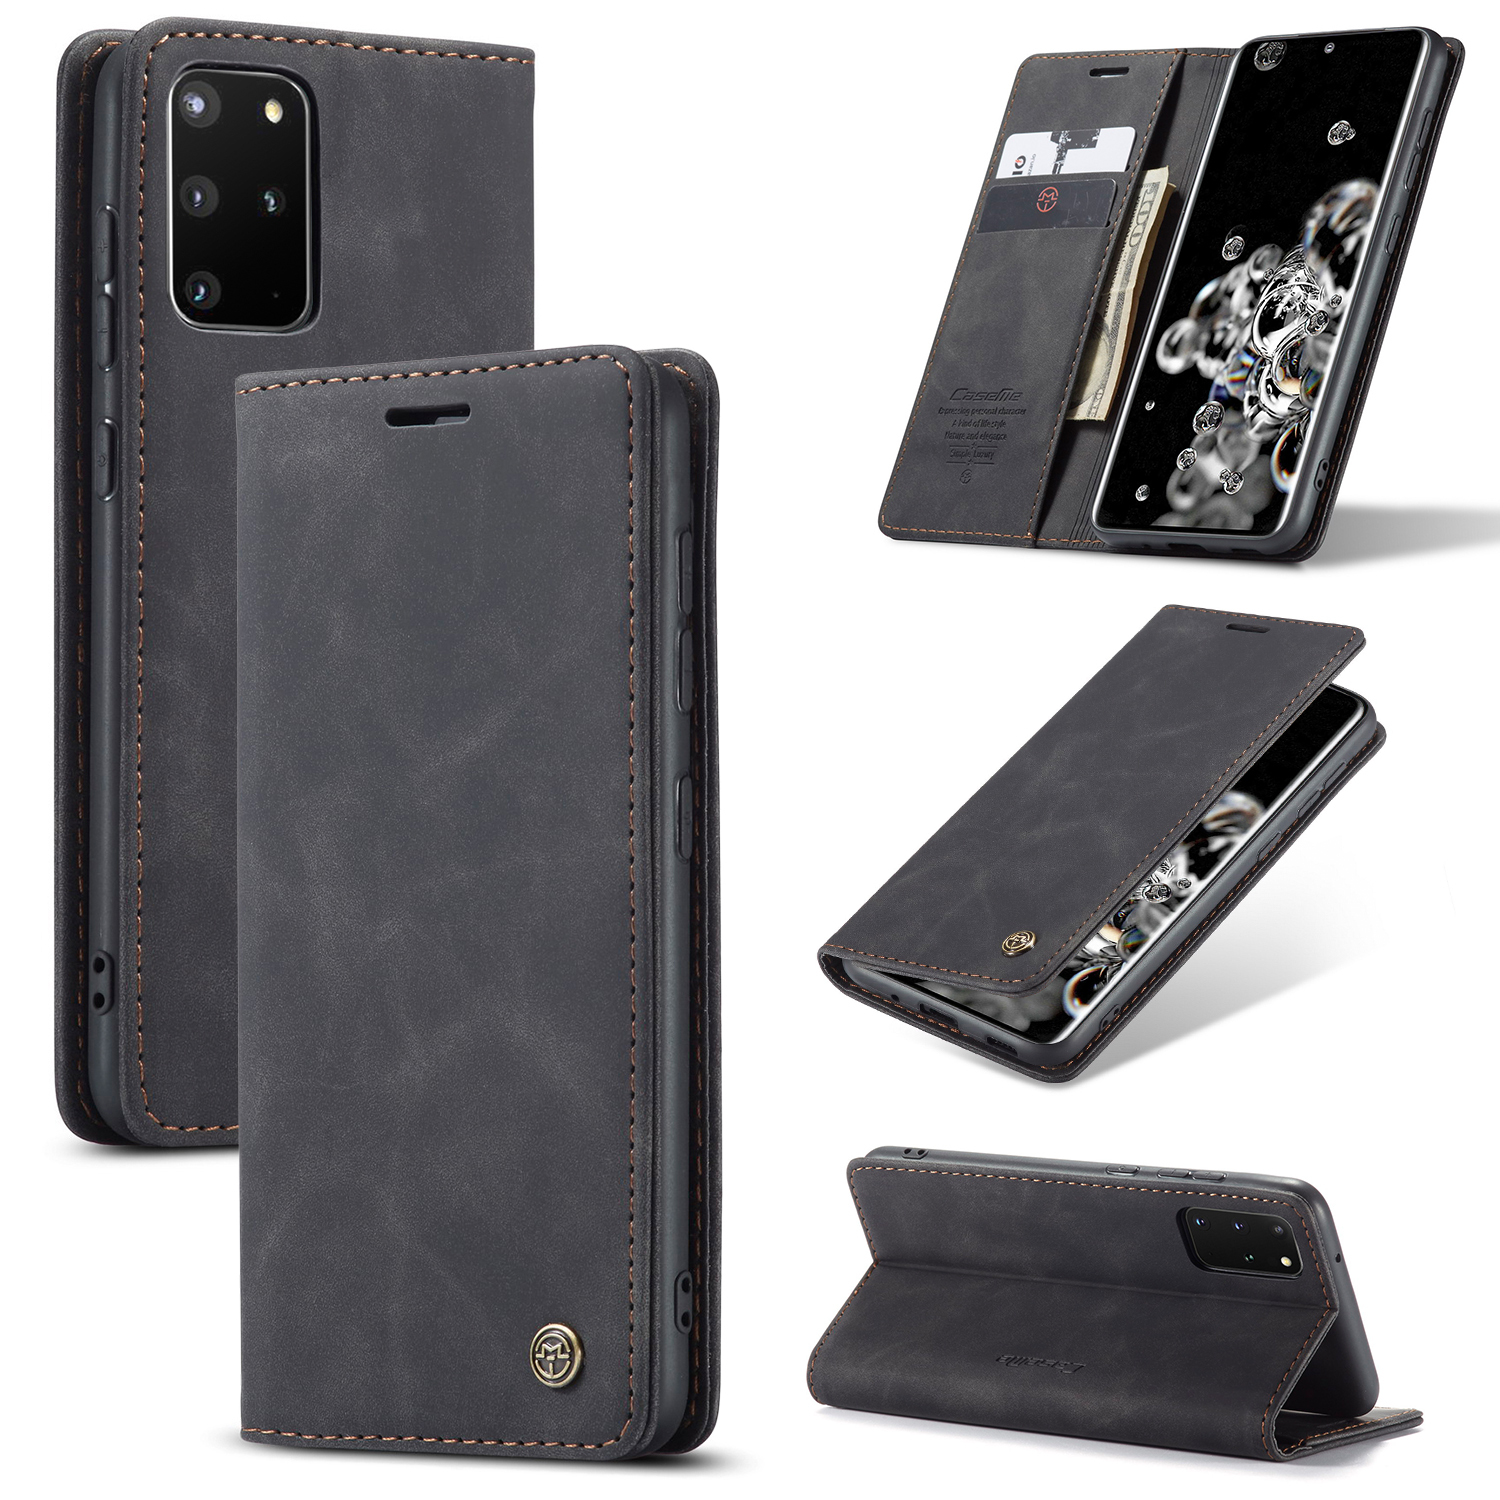 CASEME 013 Series Auto-absorbed Leather Wallet Case for S20+-Black